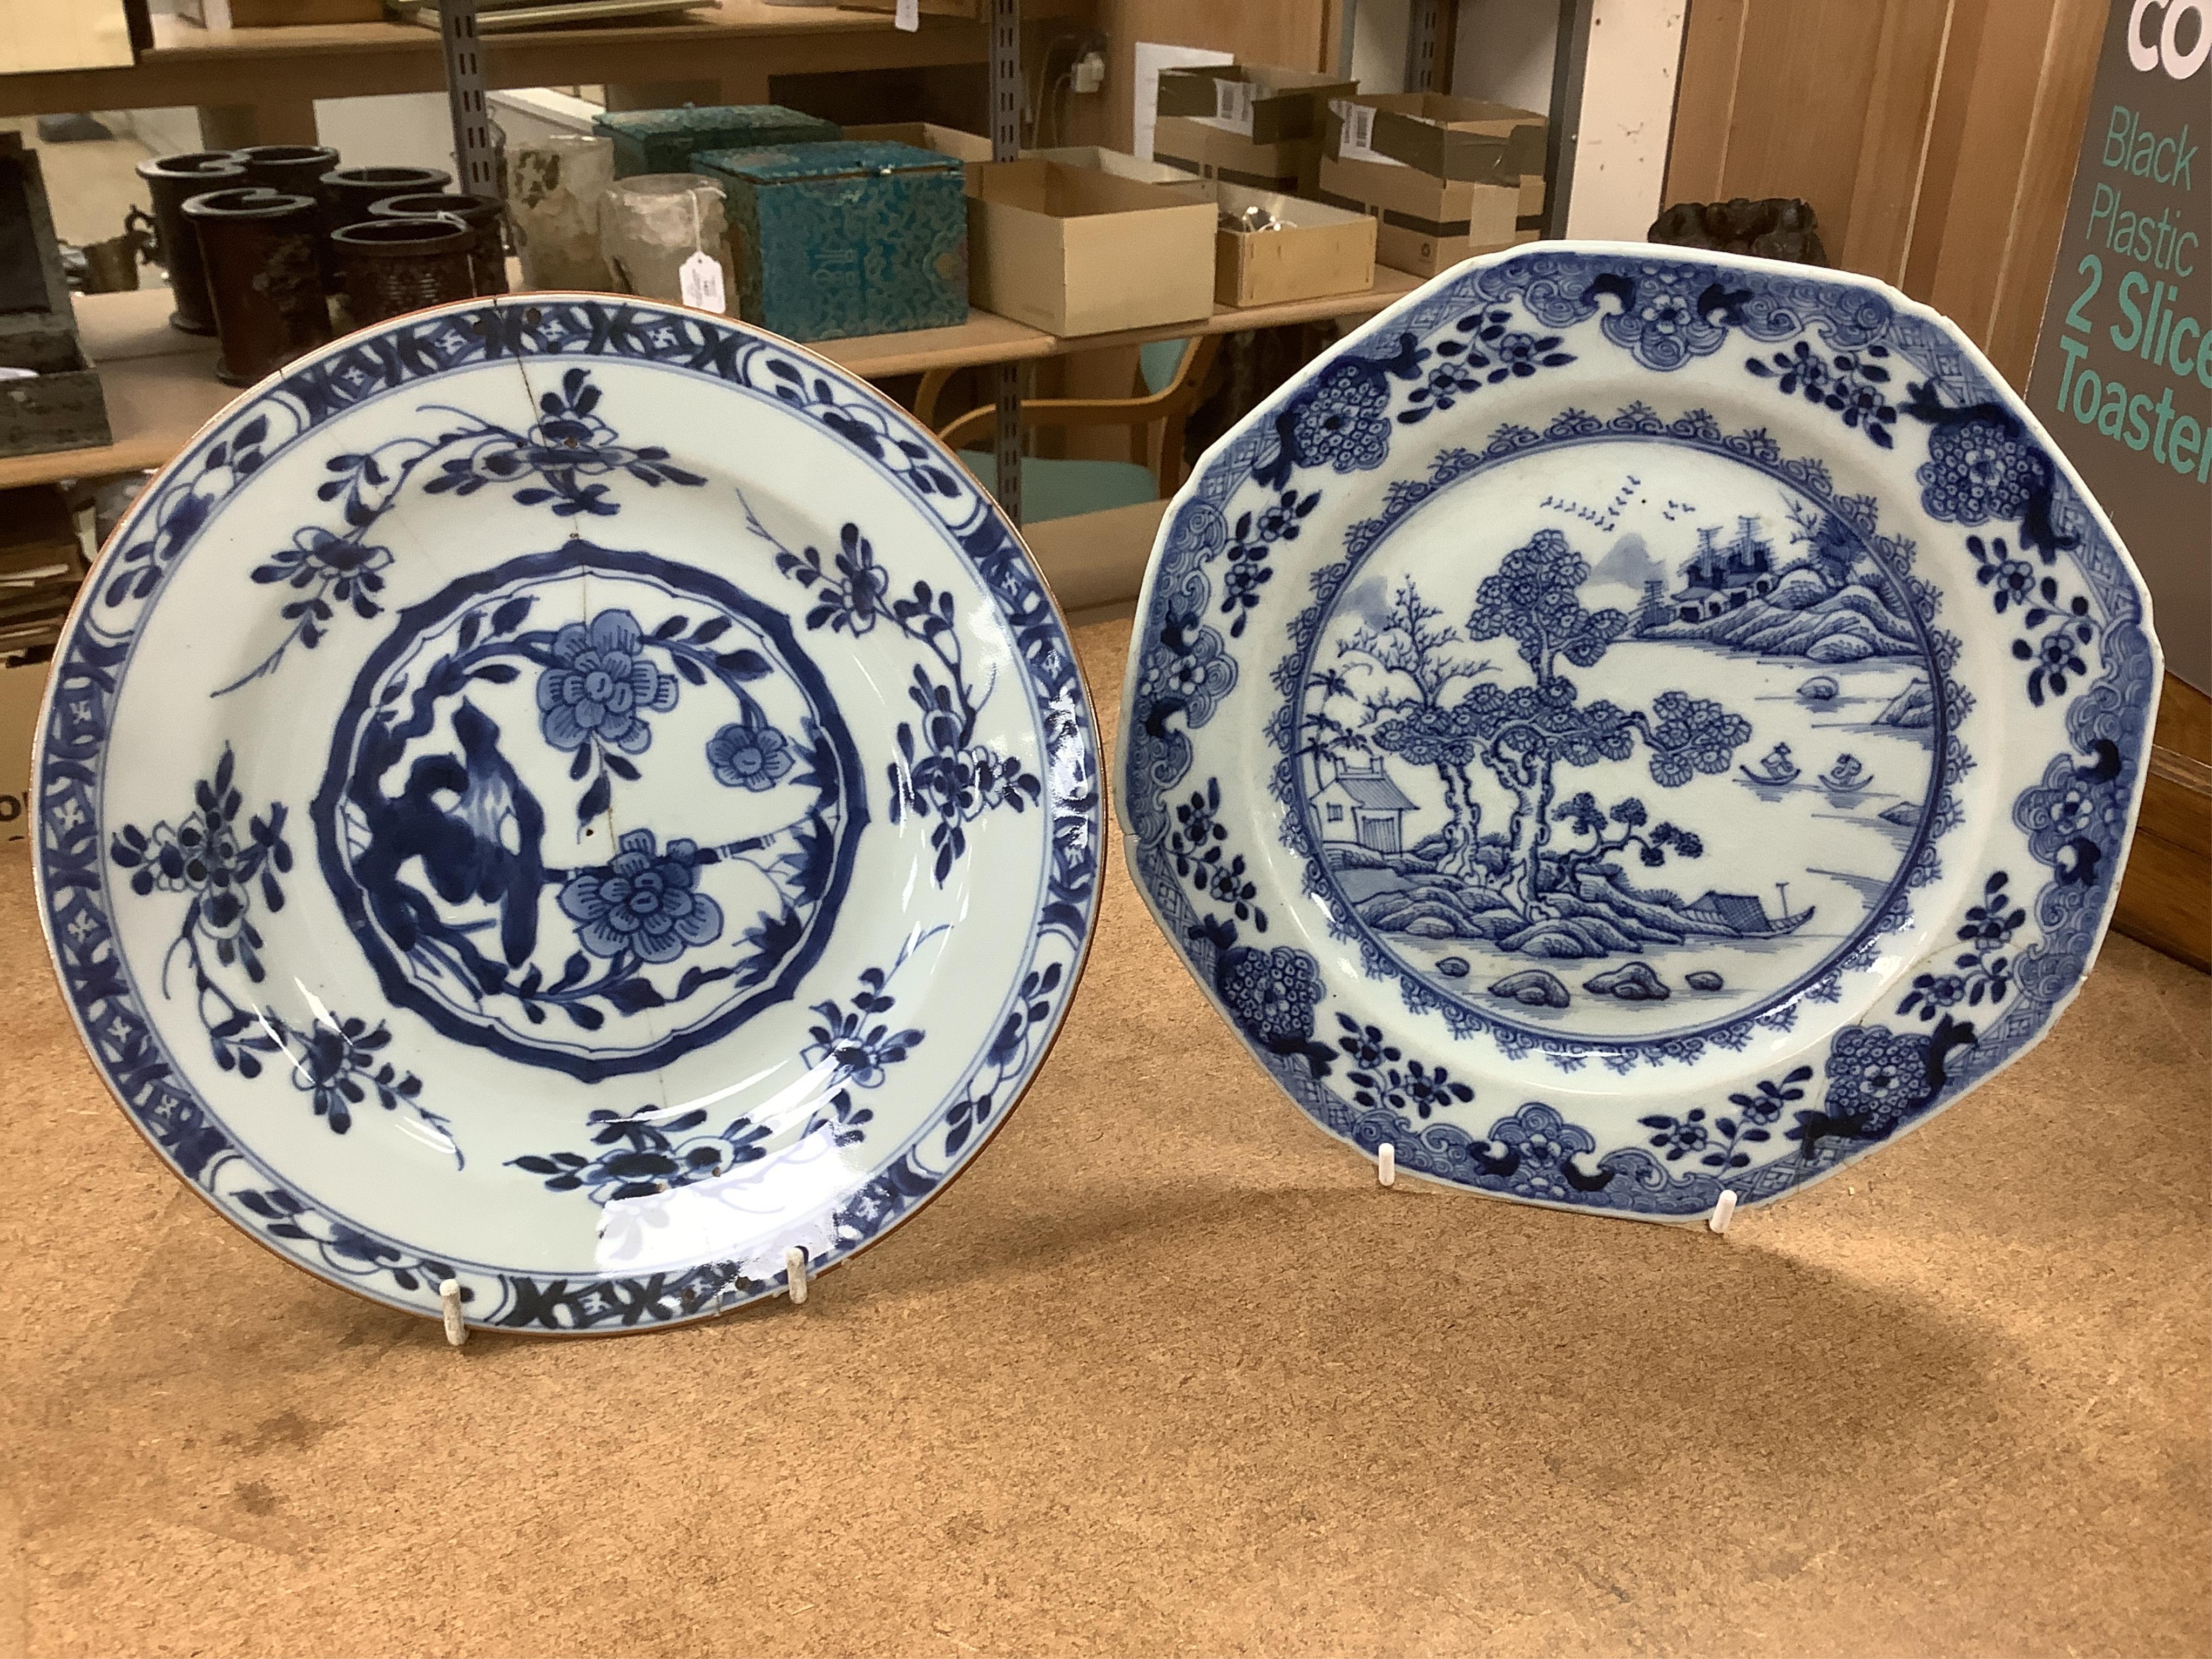 Six 18th century Chinese export blue and white plates, largest 32cm diameter. Condition - poor to fair